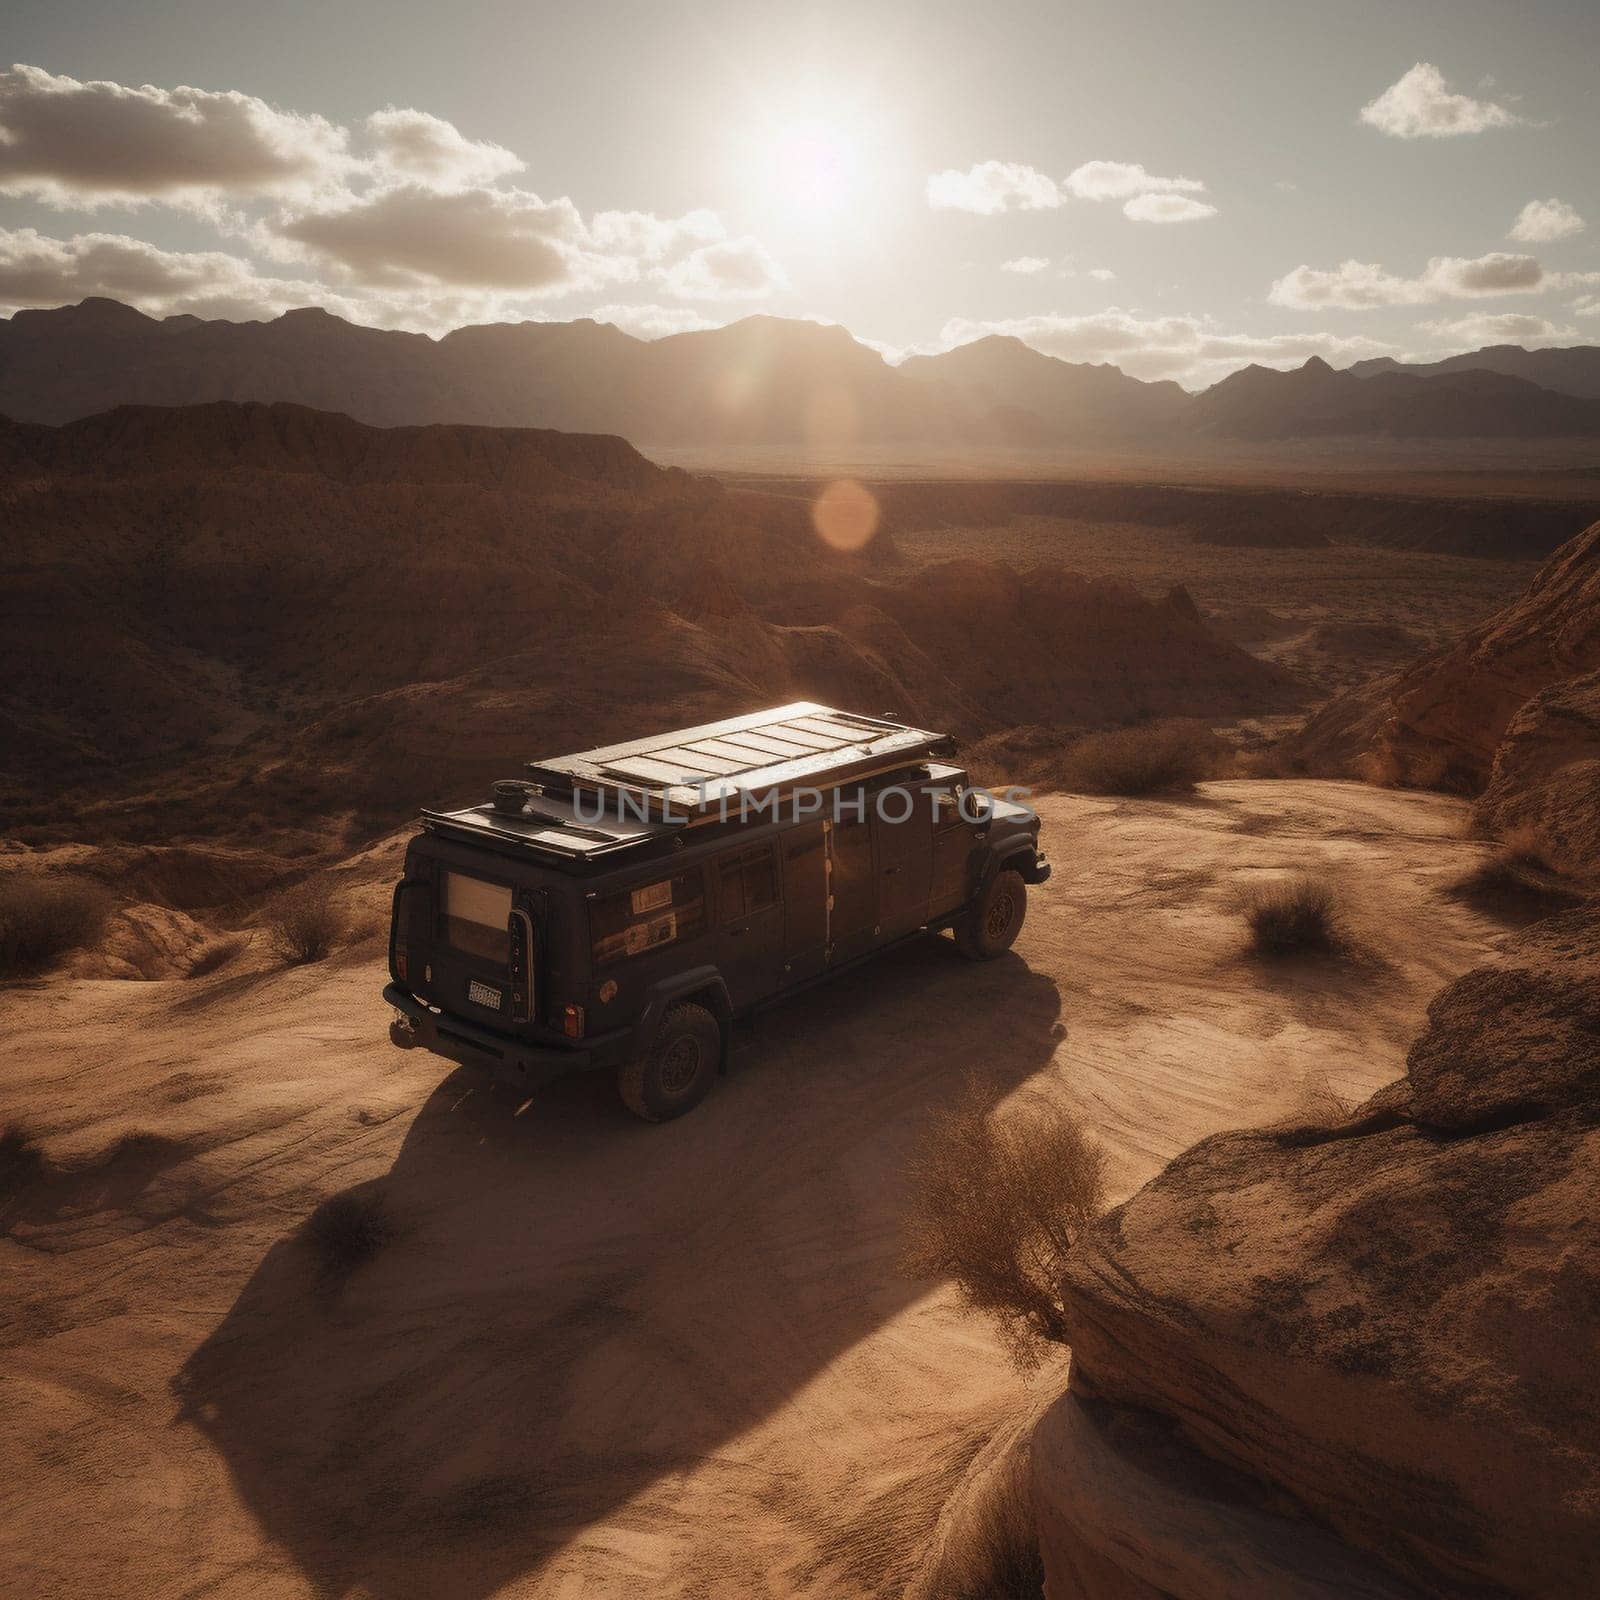 Get ready to explore the great outdoors with this image of a rugged 4x4 camper van parked on the edge of a remote canyon, with a stunning desert landscape visible in the background. The van's exterior is covered in dust and dirt, a testament to the adventures that lie ahead. The solar panels on the roof provide power to the van's amenities, making it a self-sufficient basecamp for your next desert adventure. A small trail leads from the van down into the canyon, inviting you to explore the rugged terrain and discover hidden gems. This is the perfect location for anyone seeking a true desert experience.